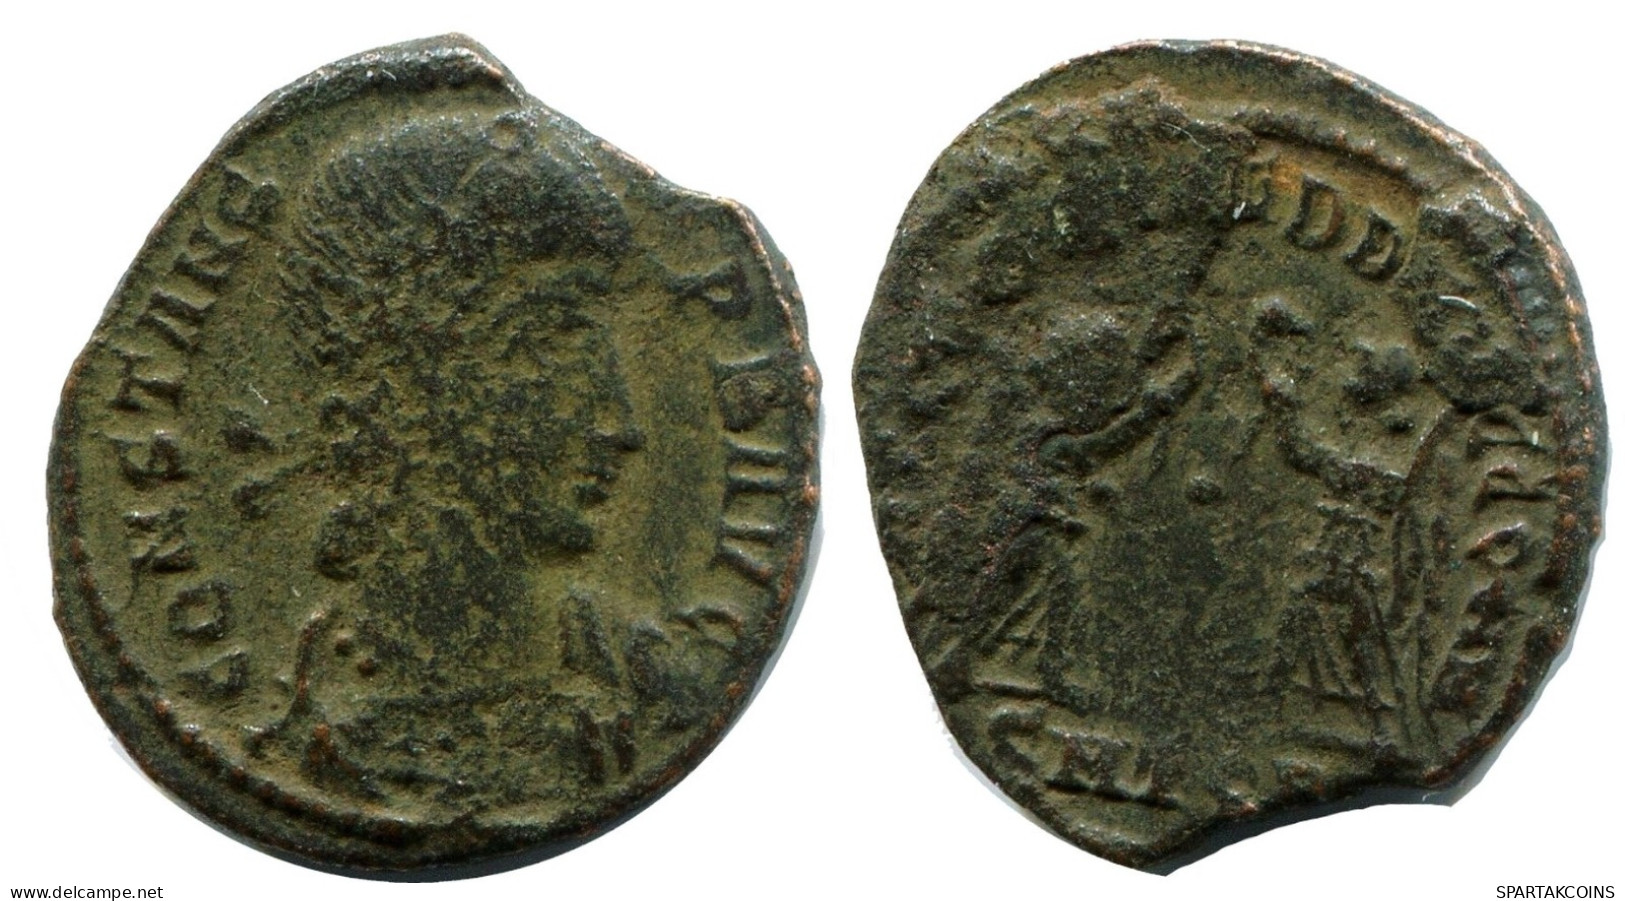 CONSTANS MINTED IN THESSALONICA FOUND IN IHNASYAH HOARD EGYPT #ANC11874.14.D.A - The Christian Empire (307 AD To 363 AD)